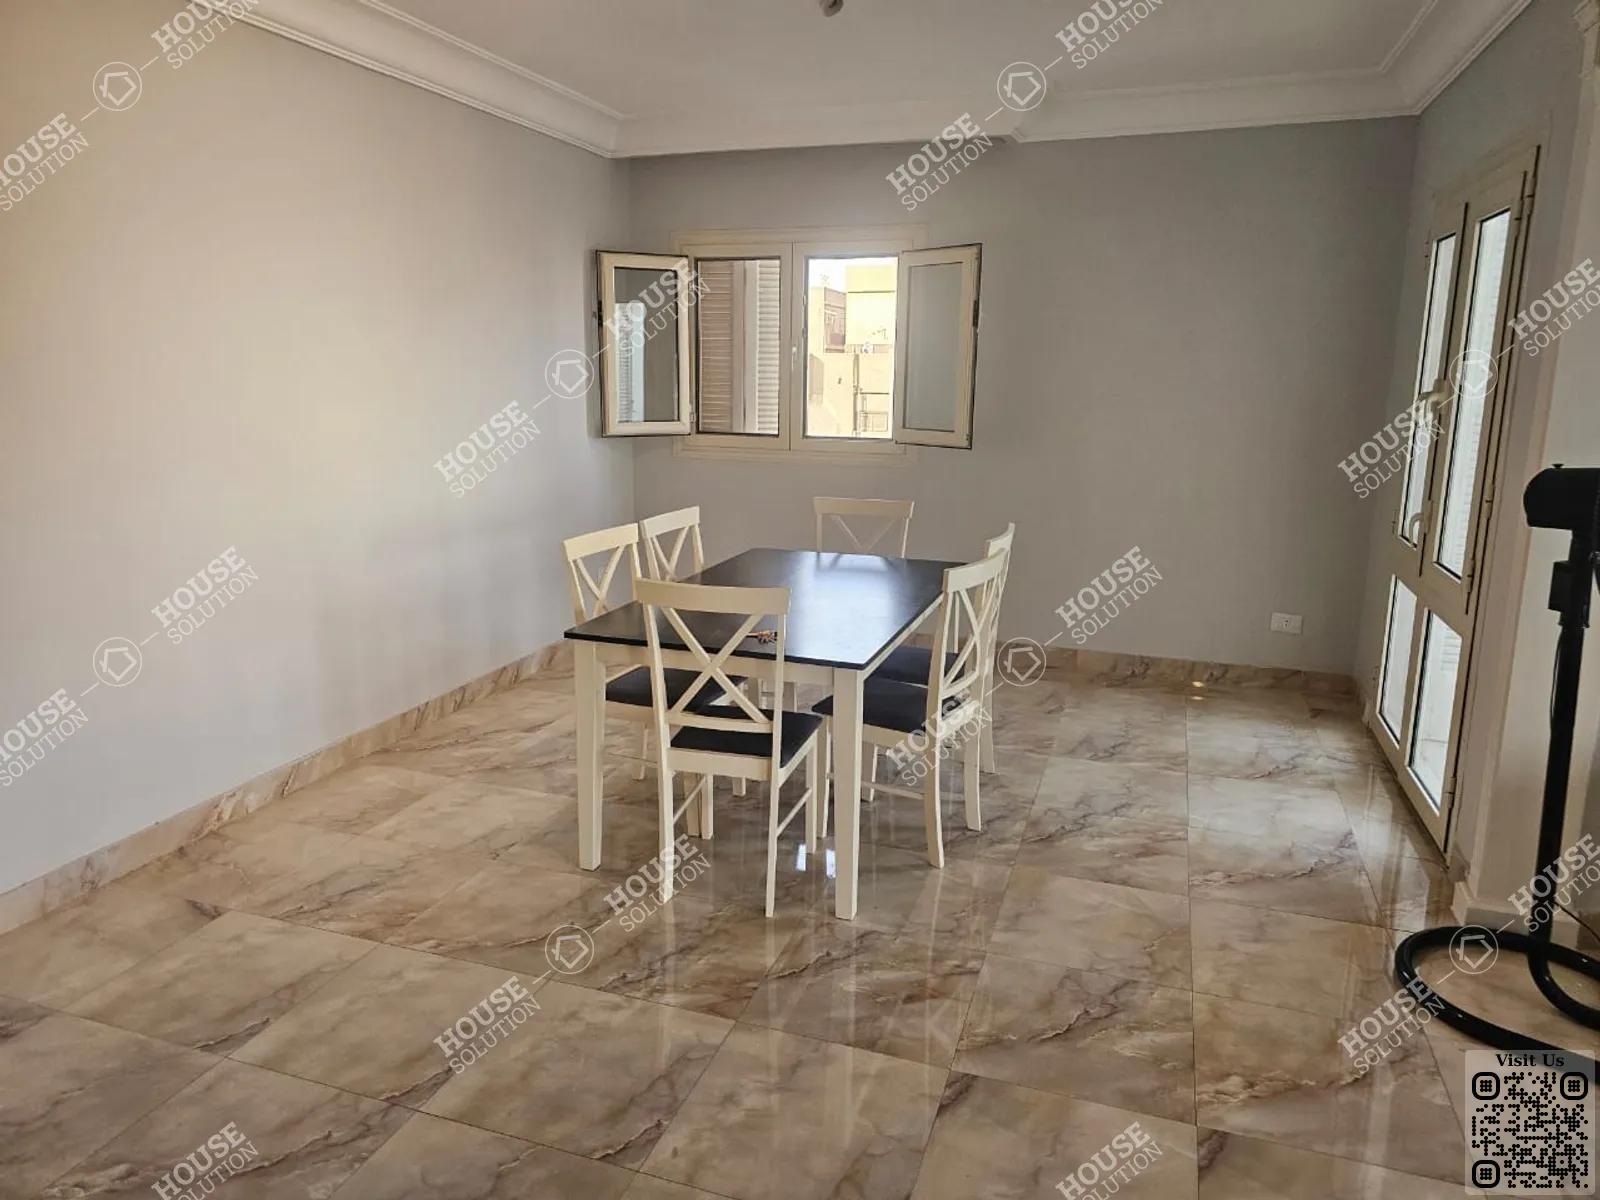 DINING AREA @ Apartments For Rent In Maadi Maadi Sarayat Area: 145 m² consists of 3 Bedrooms 2 Bathrooms Furnished 5 stars #5918-1